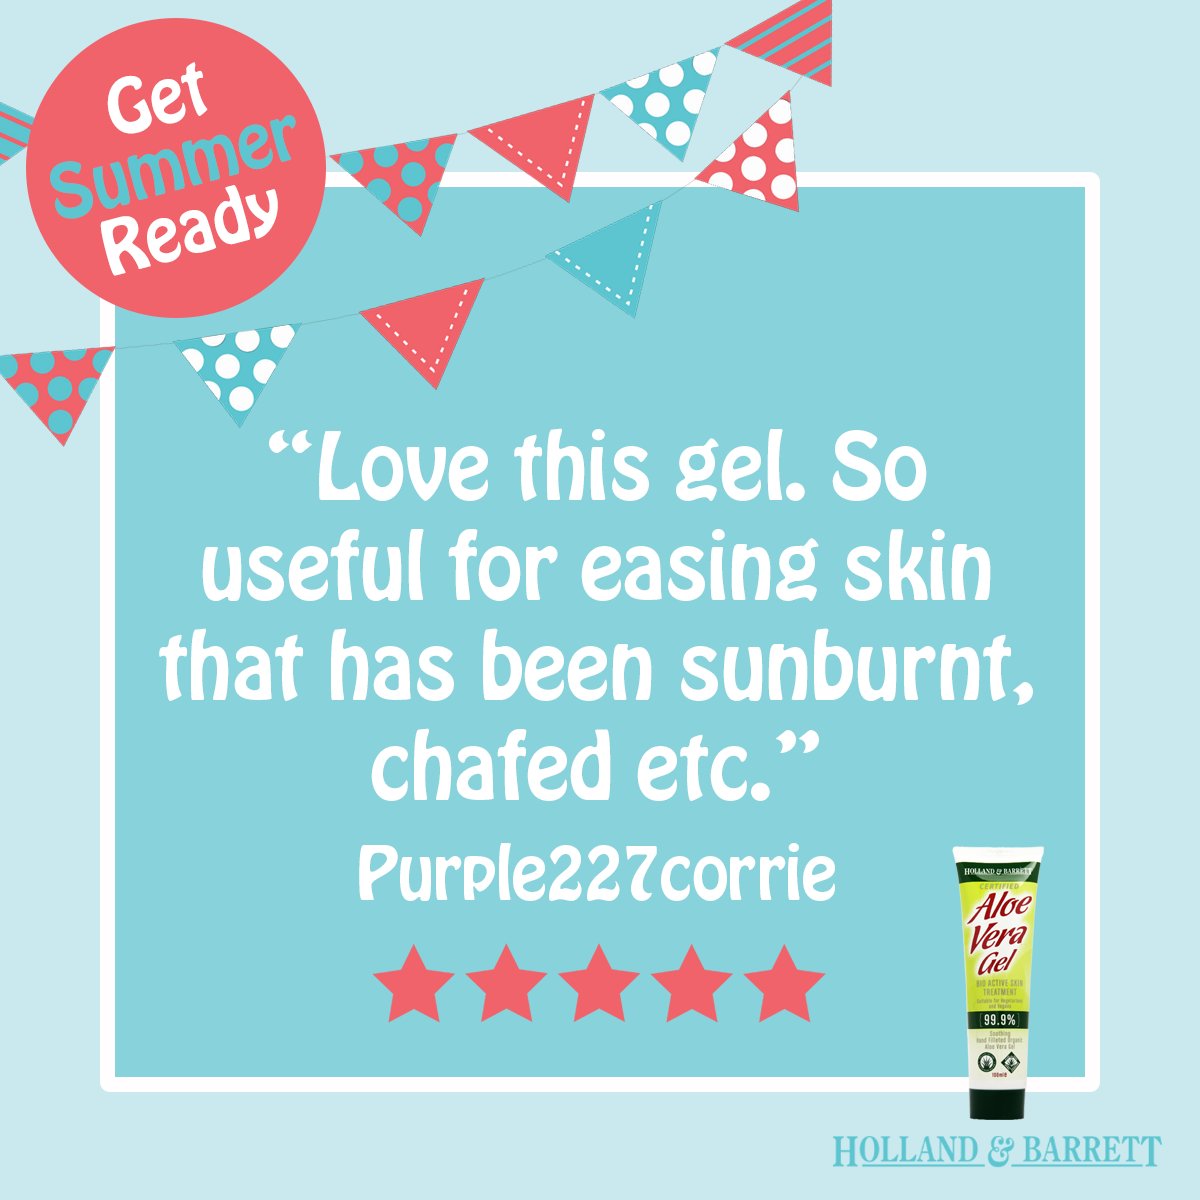 Our customer Purple227corrie gave our Aloe Vera Gel five stars and here's why! https://t.co/mfJmZ6xvh5